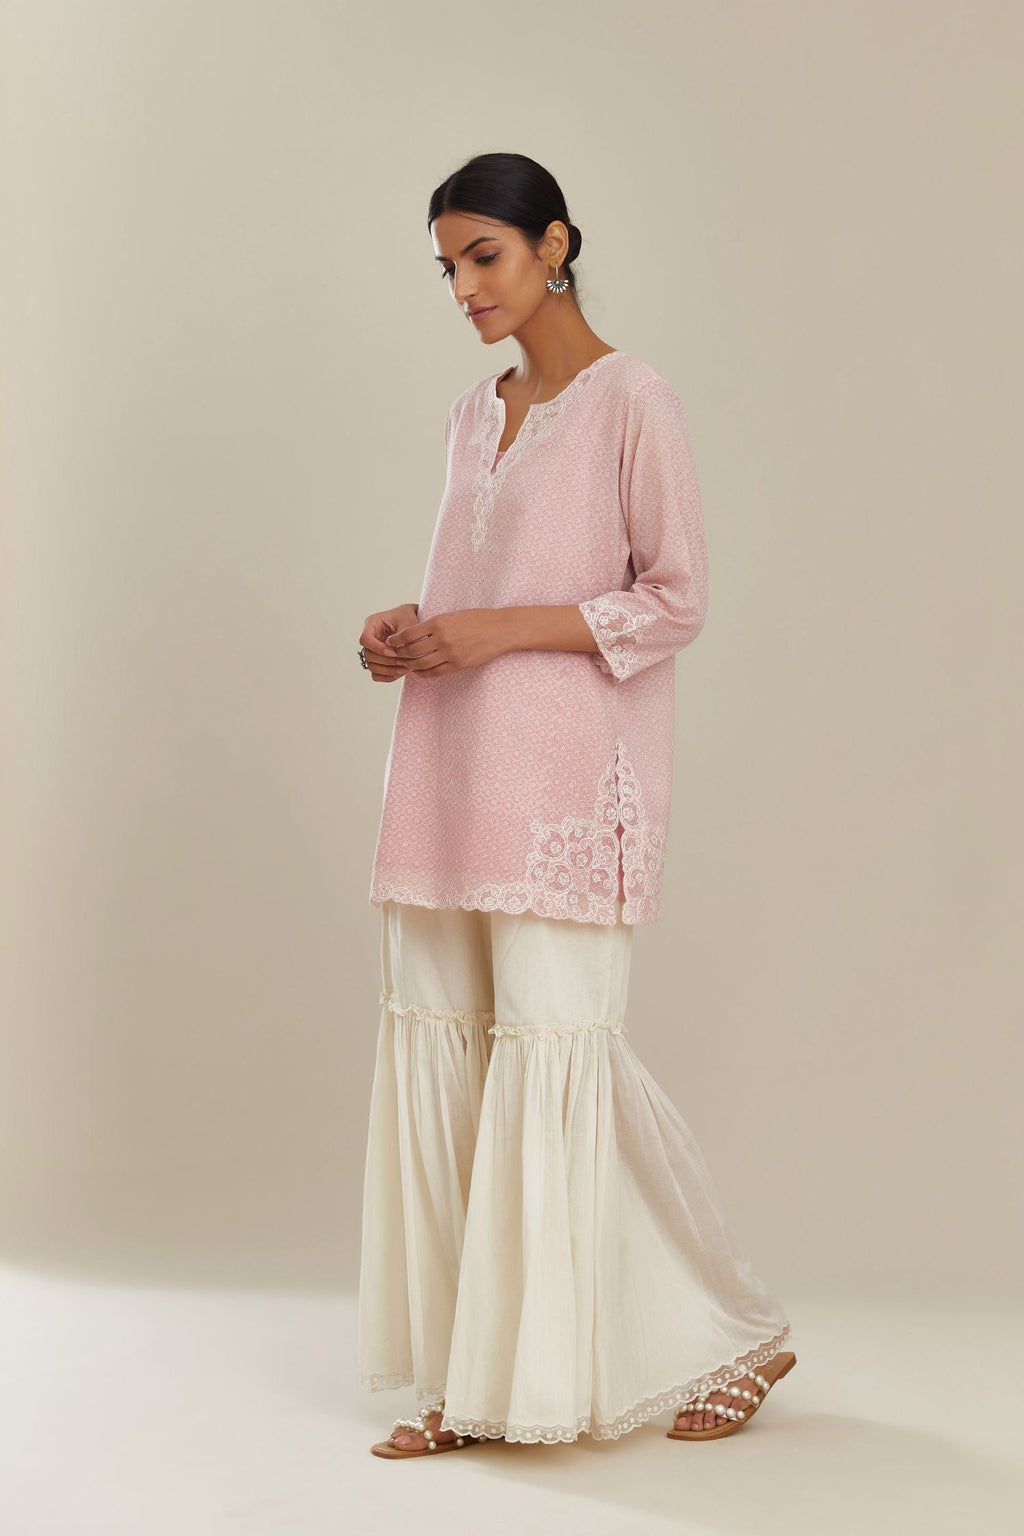 Pink hand block over-printed cotton straight short kurta set with embroidered cotton chanderi cutwork, highlighted with sequins.